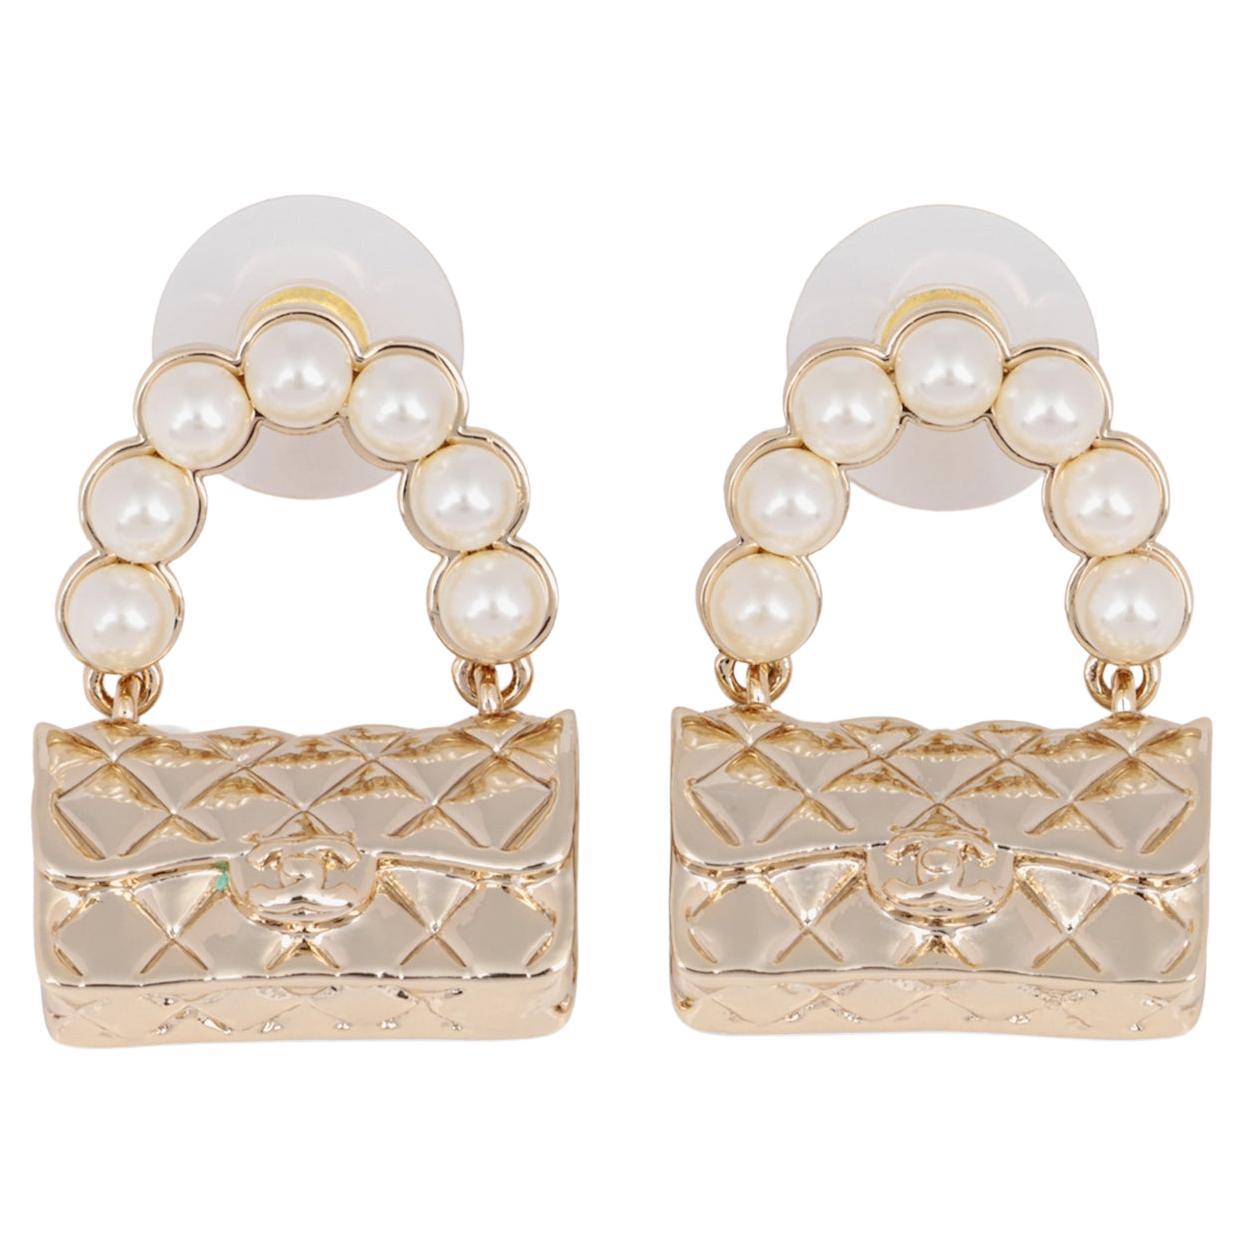 Chanel Faux Pearl Gold Tone Quilted Flap Bag Earrings For Sale